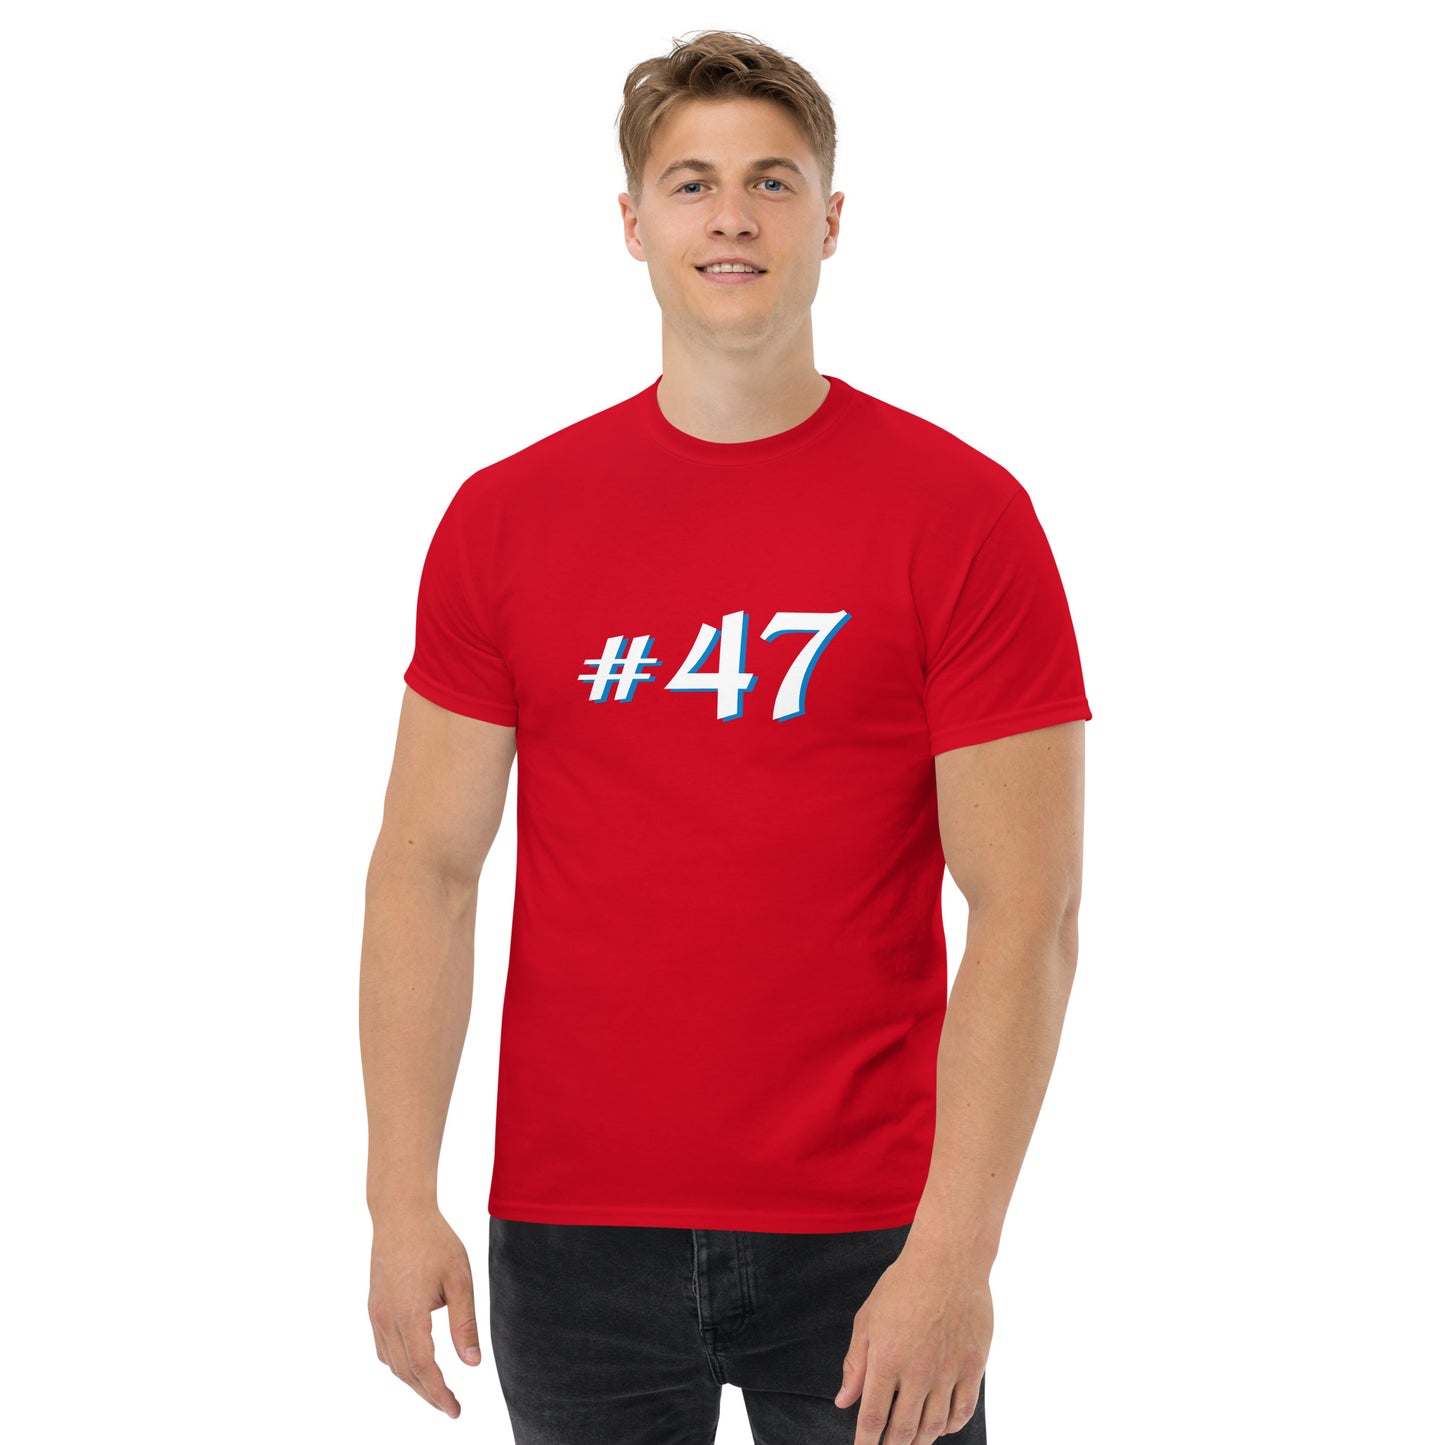 Men's #47 "Style A" Classic Tee